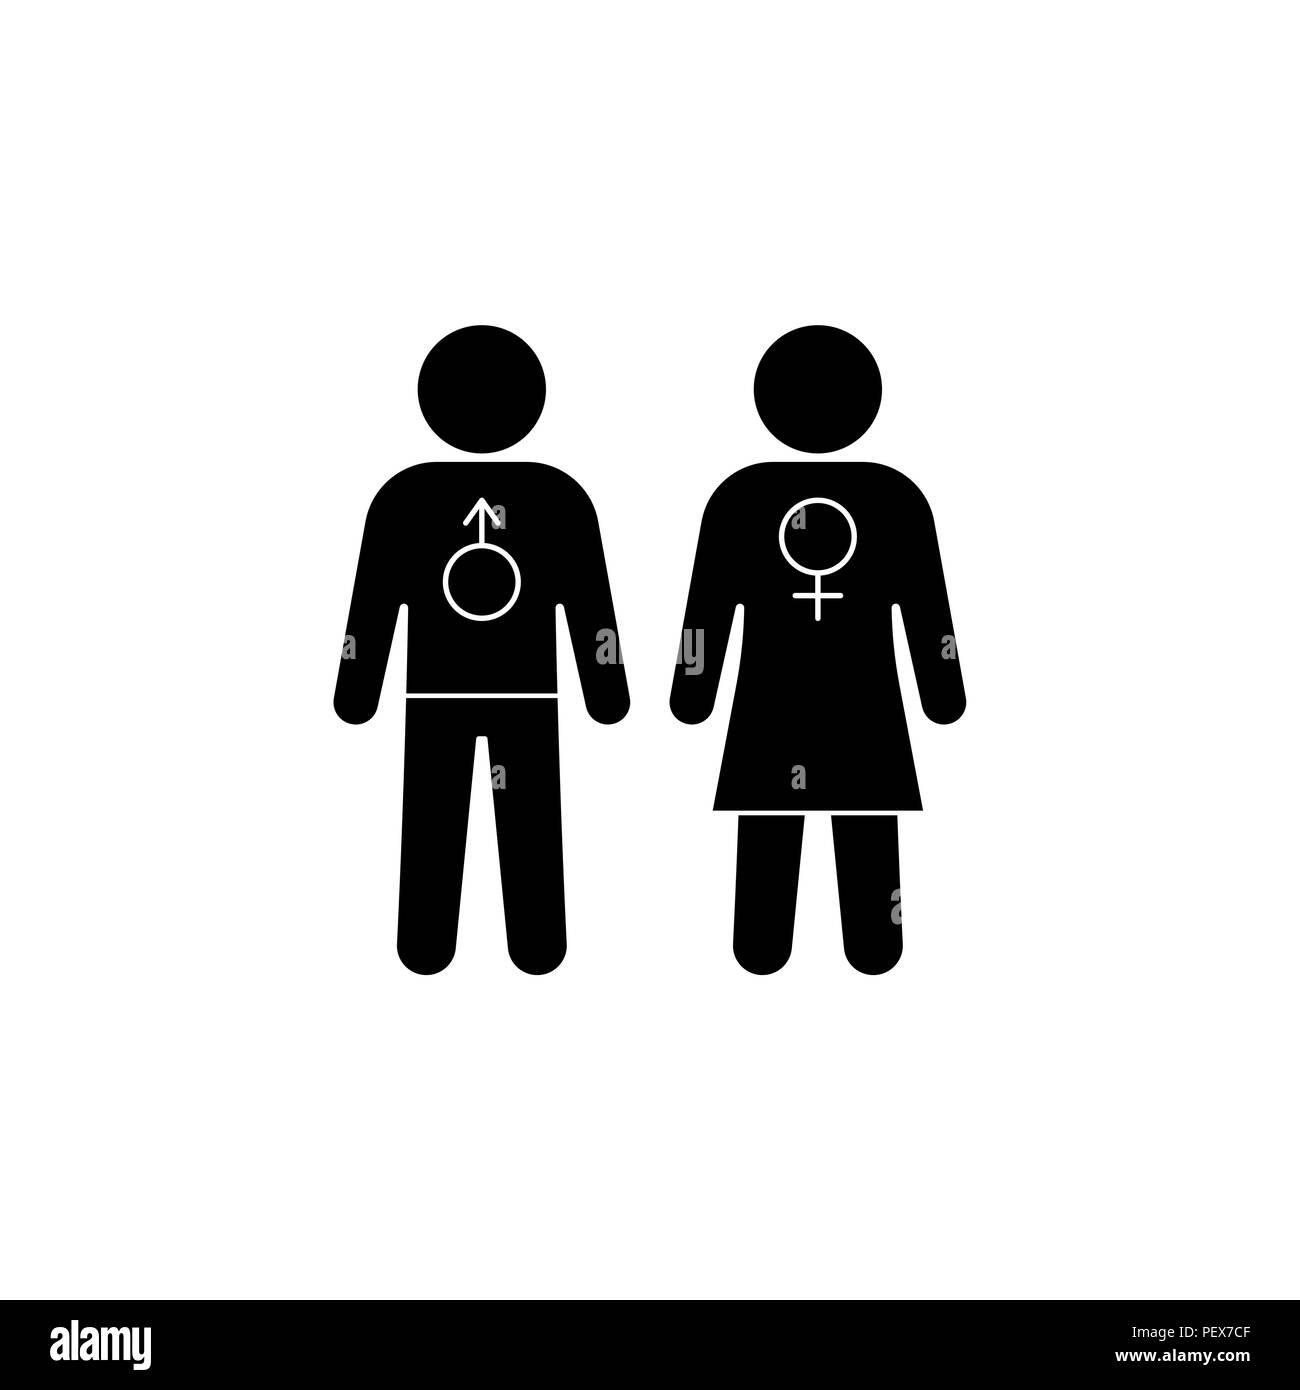 man and woman icon. vector illustration black on white background Stock Vector